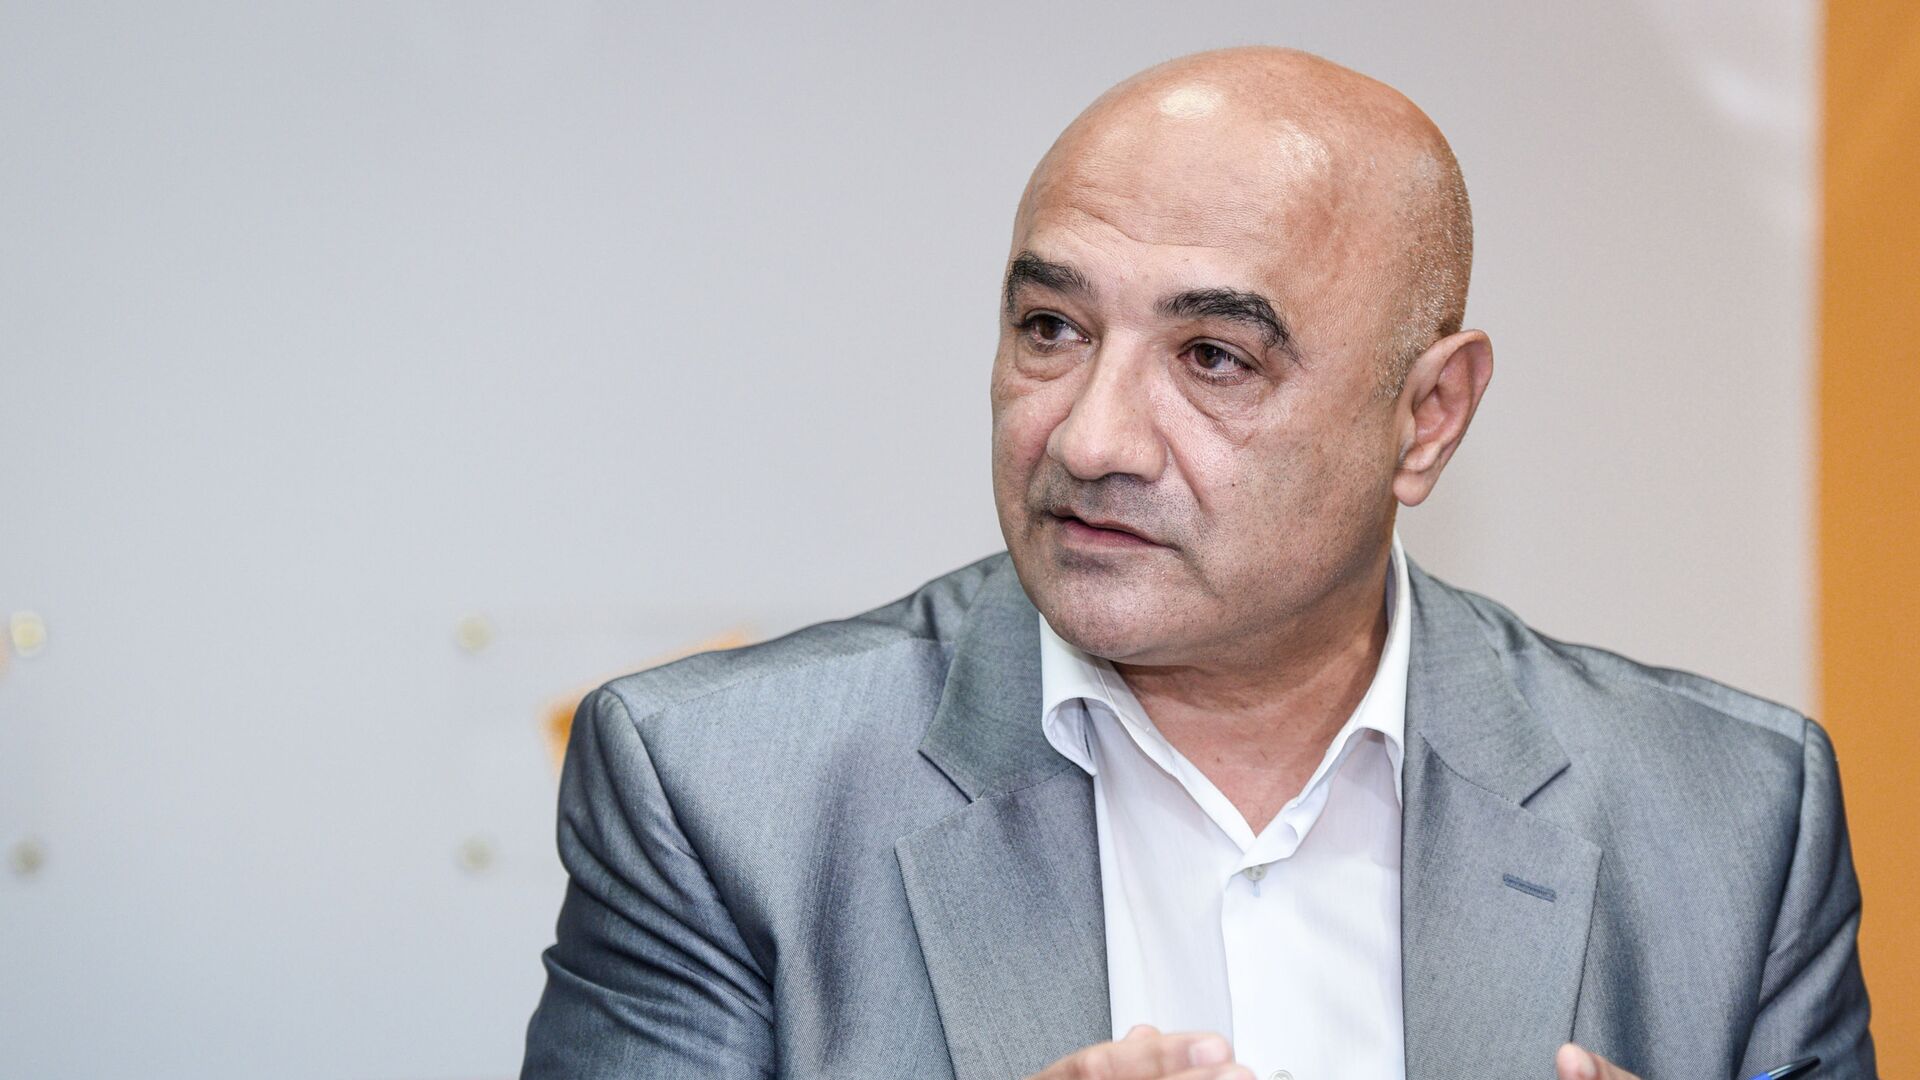 Armenia aims to justify its fake propaganda against Azerbaijan by resorting to military provocations - political scientist